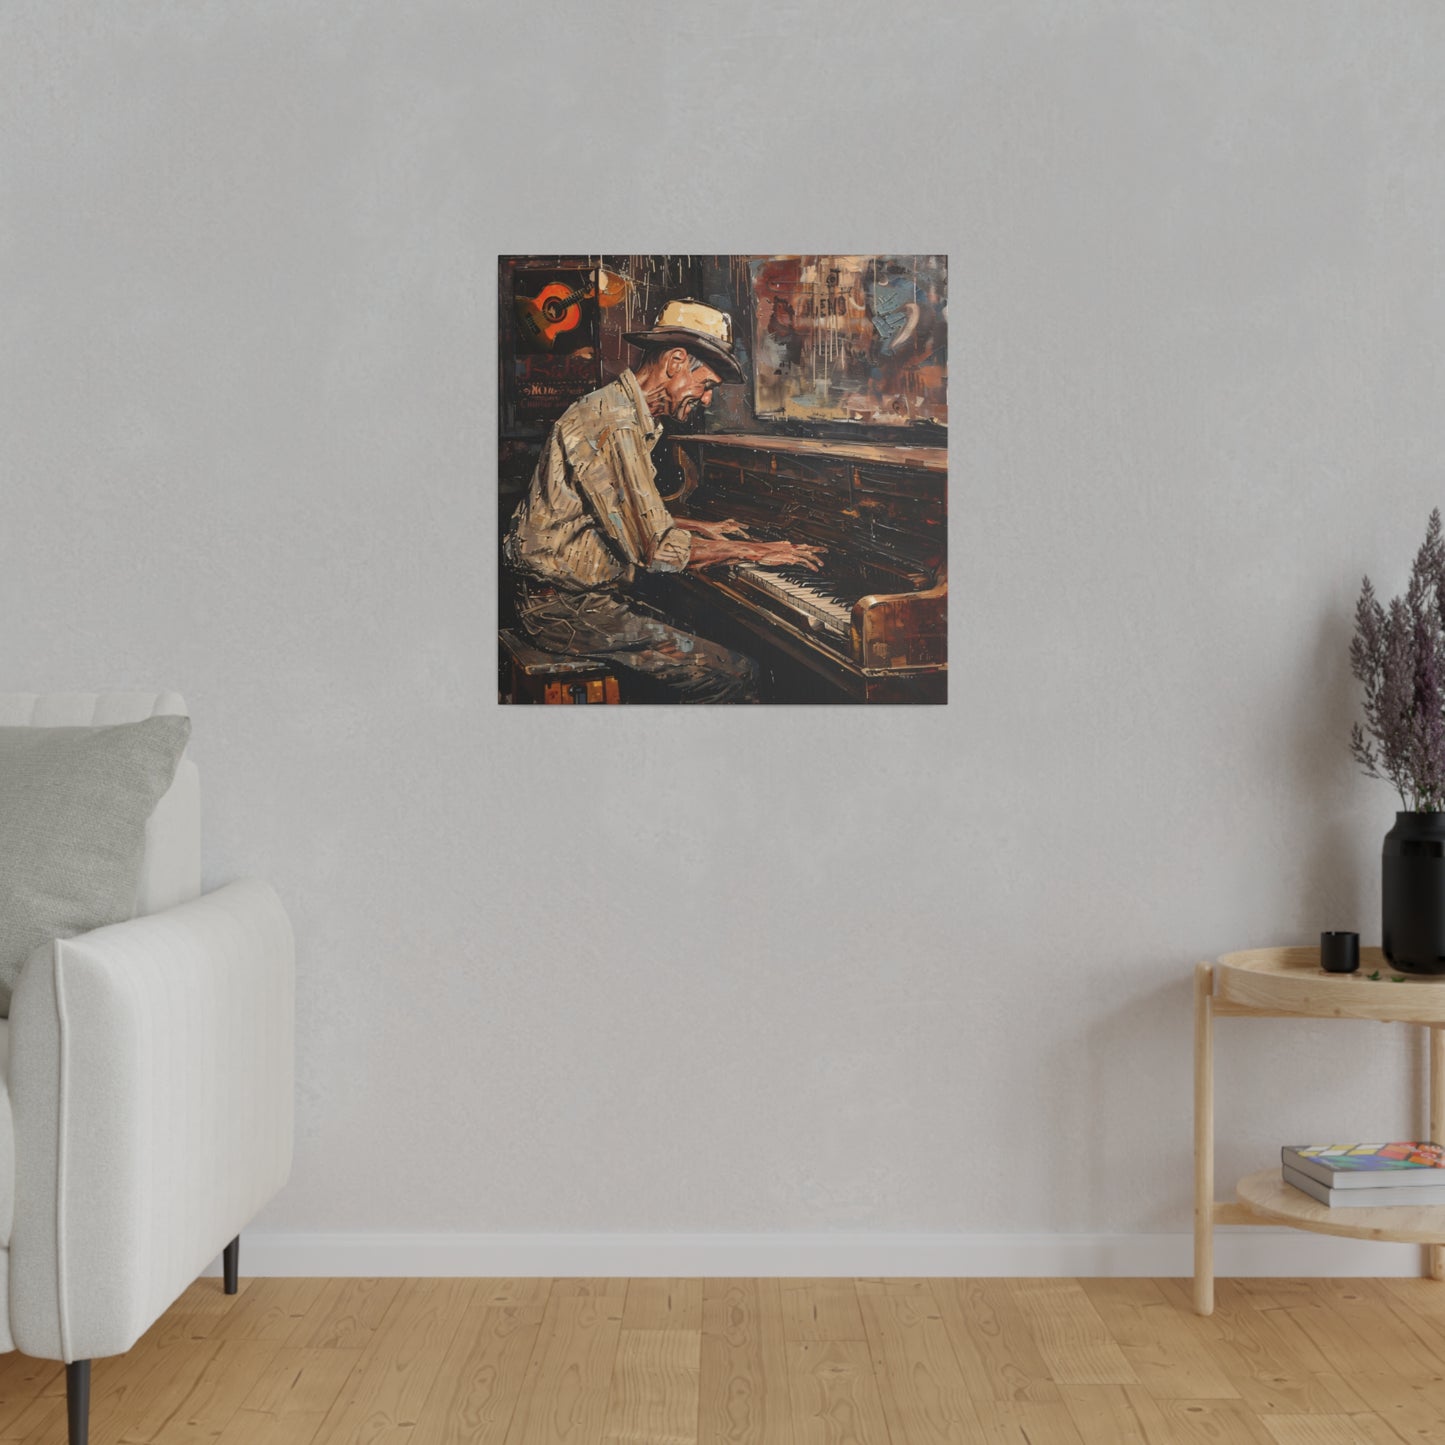 Matte Canvas, Stretched, 0.75" - Honky Tonk Piano Player